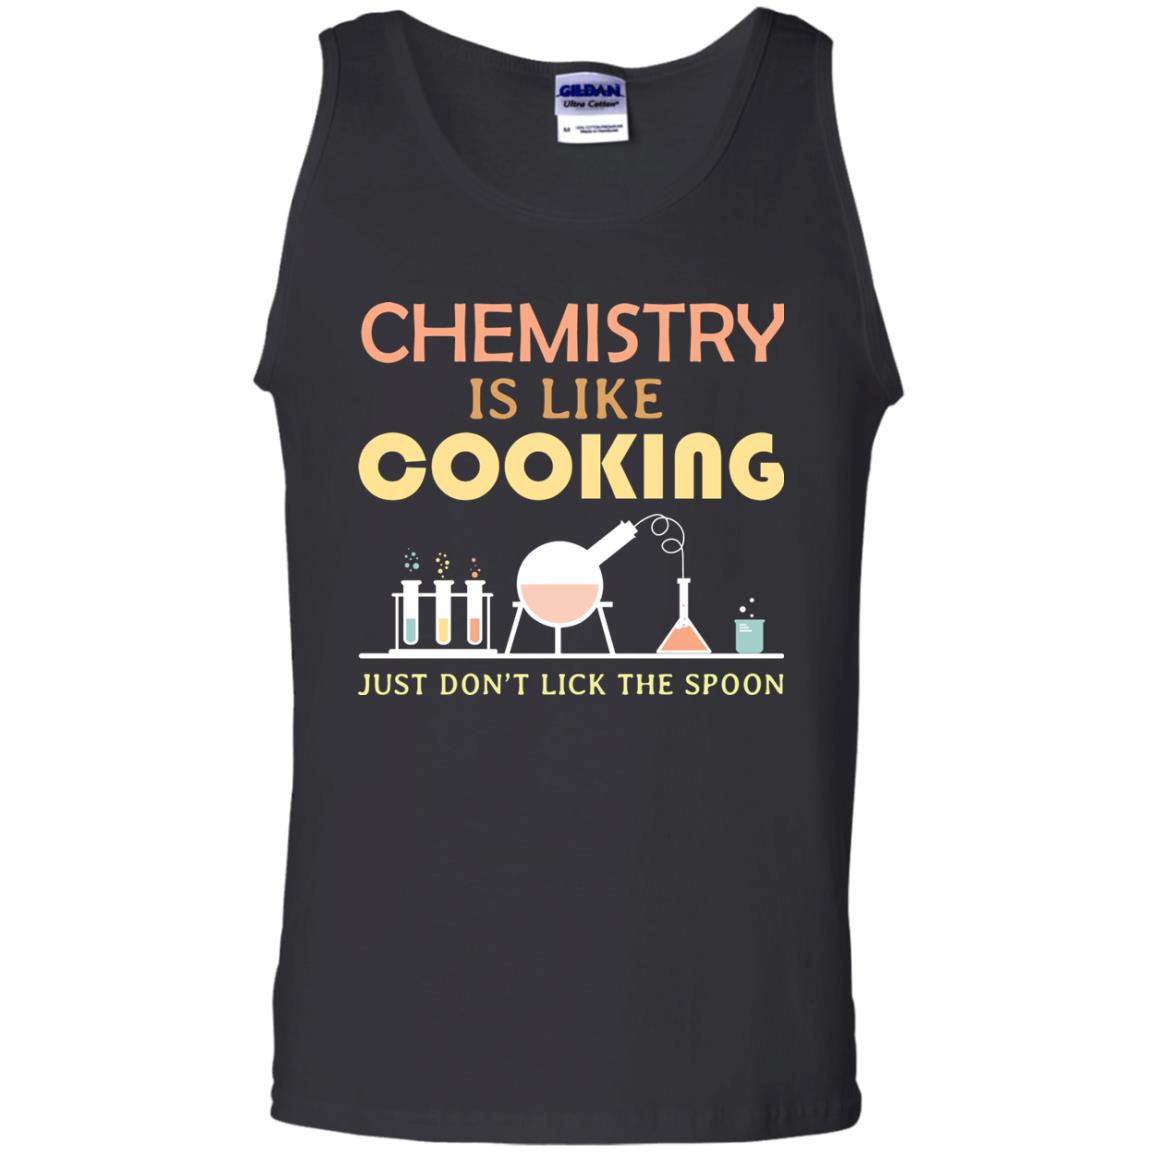 Chemistry Is Like Cooking Just Don't Lick The Spoon ShirtG220 Gildan 100% Cotton Tank Top